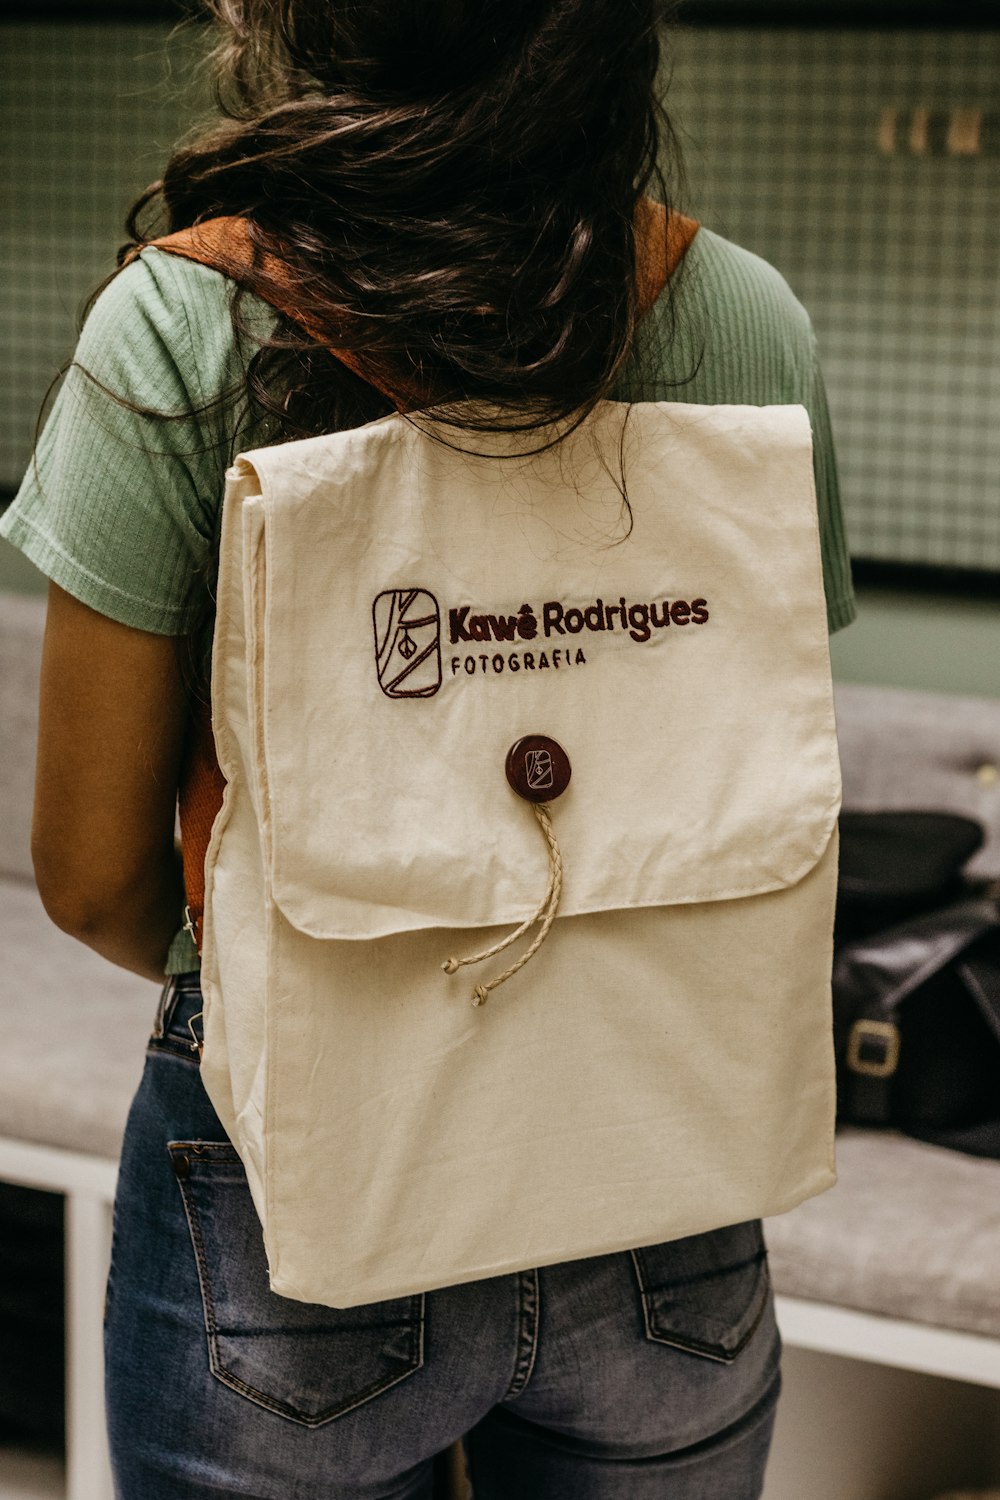 a woman carrying a bag with a logo on it